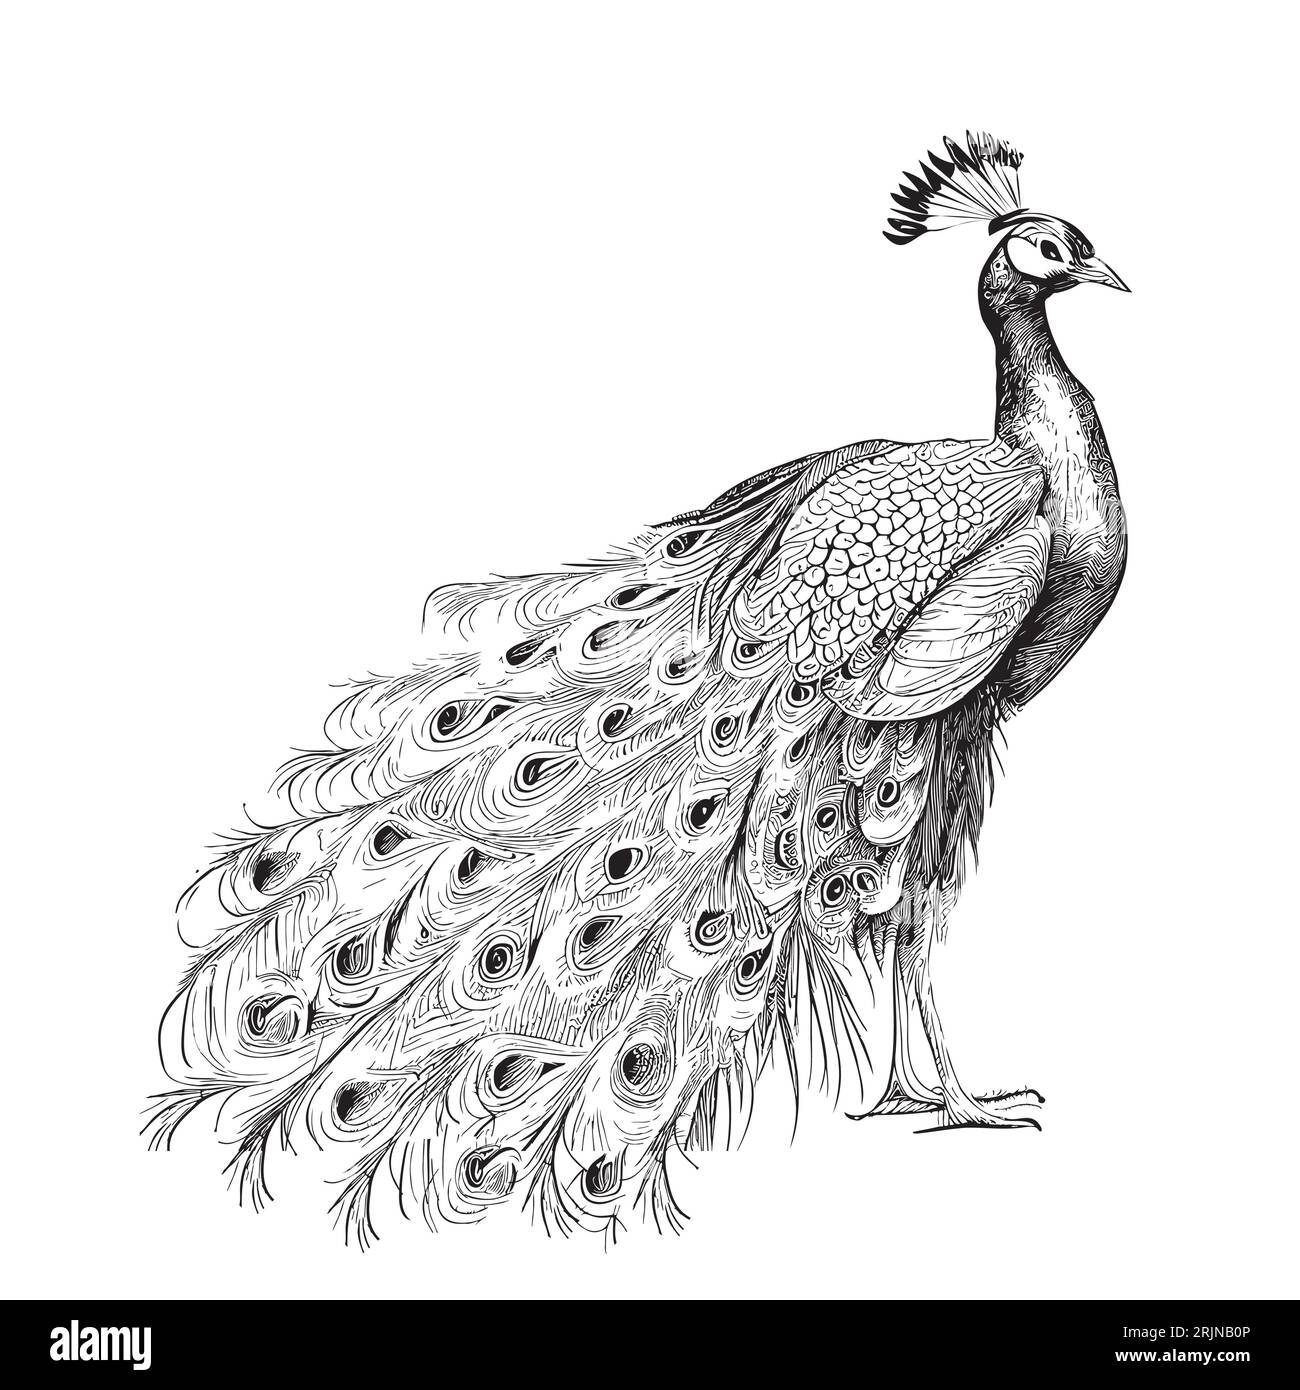 Peacock Drawing Cliparts, Stock Vector and Royalty Free Peacock Drawing  Illustrations